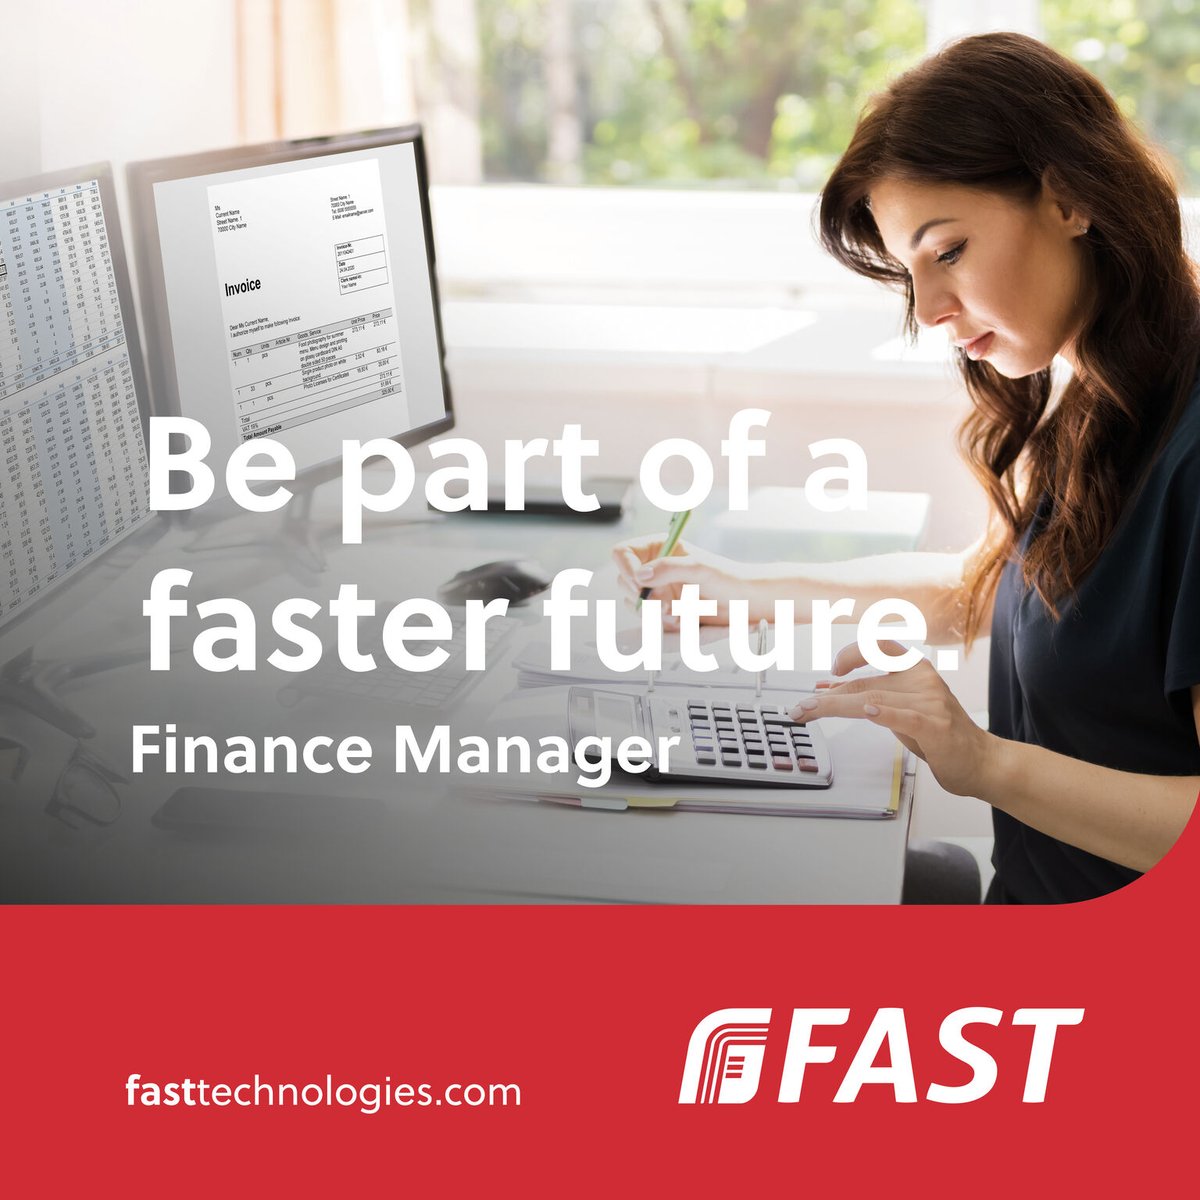 🔊 We are hiring! 📷 FAST are recruiting for a Finance Manager. The Finance Manager role supports the preparation of monthly accounts, including cost management & profitability analysis. 📷bit.ly/3vcB6WL #TeamFAST #JobVacancy #FinanceManager